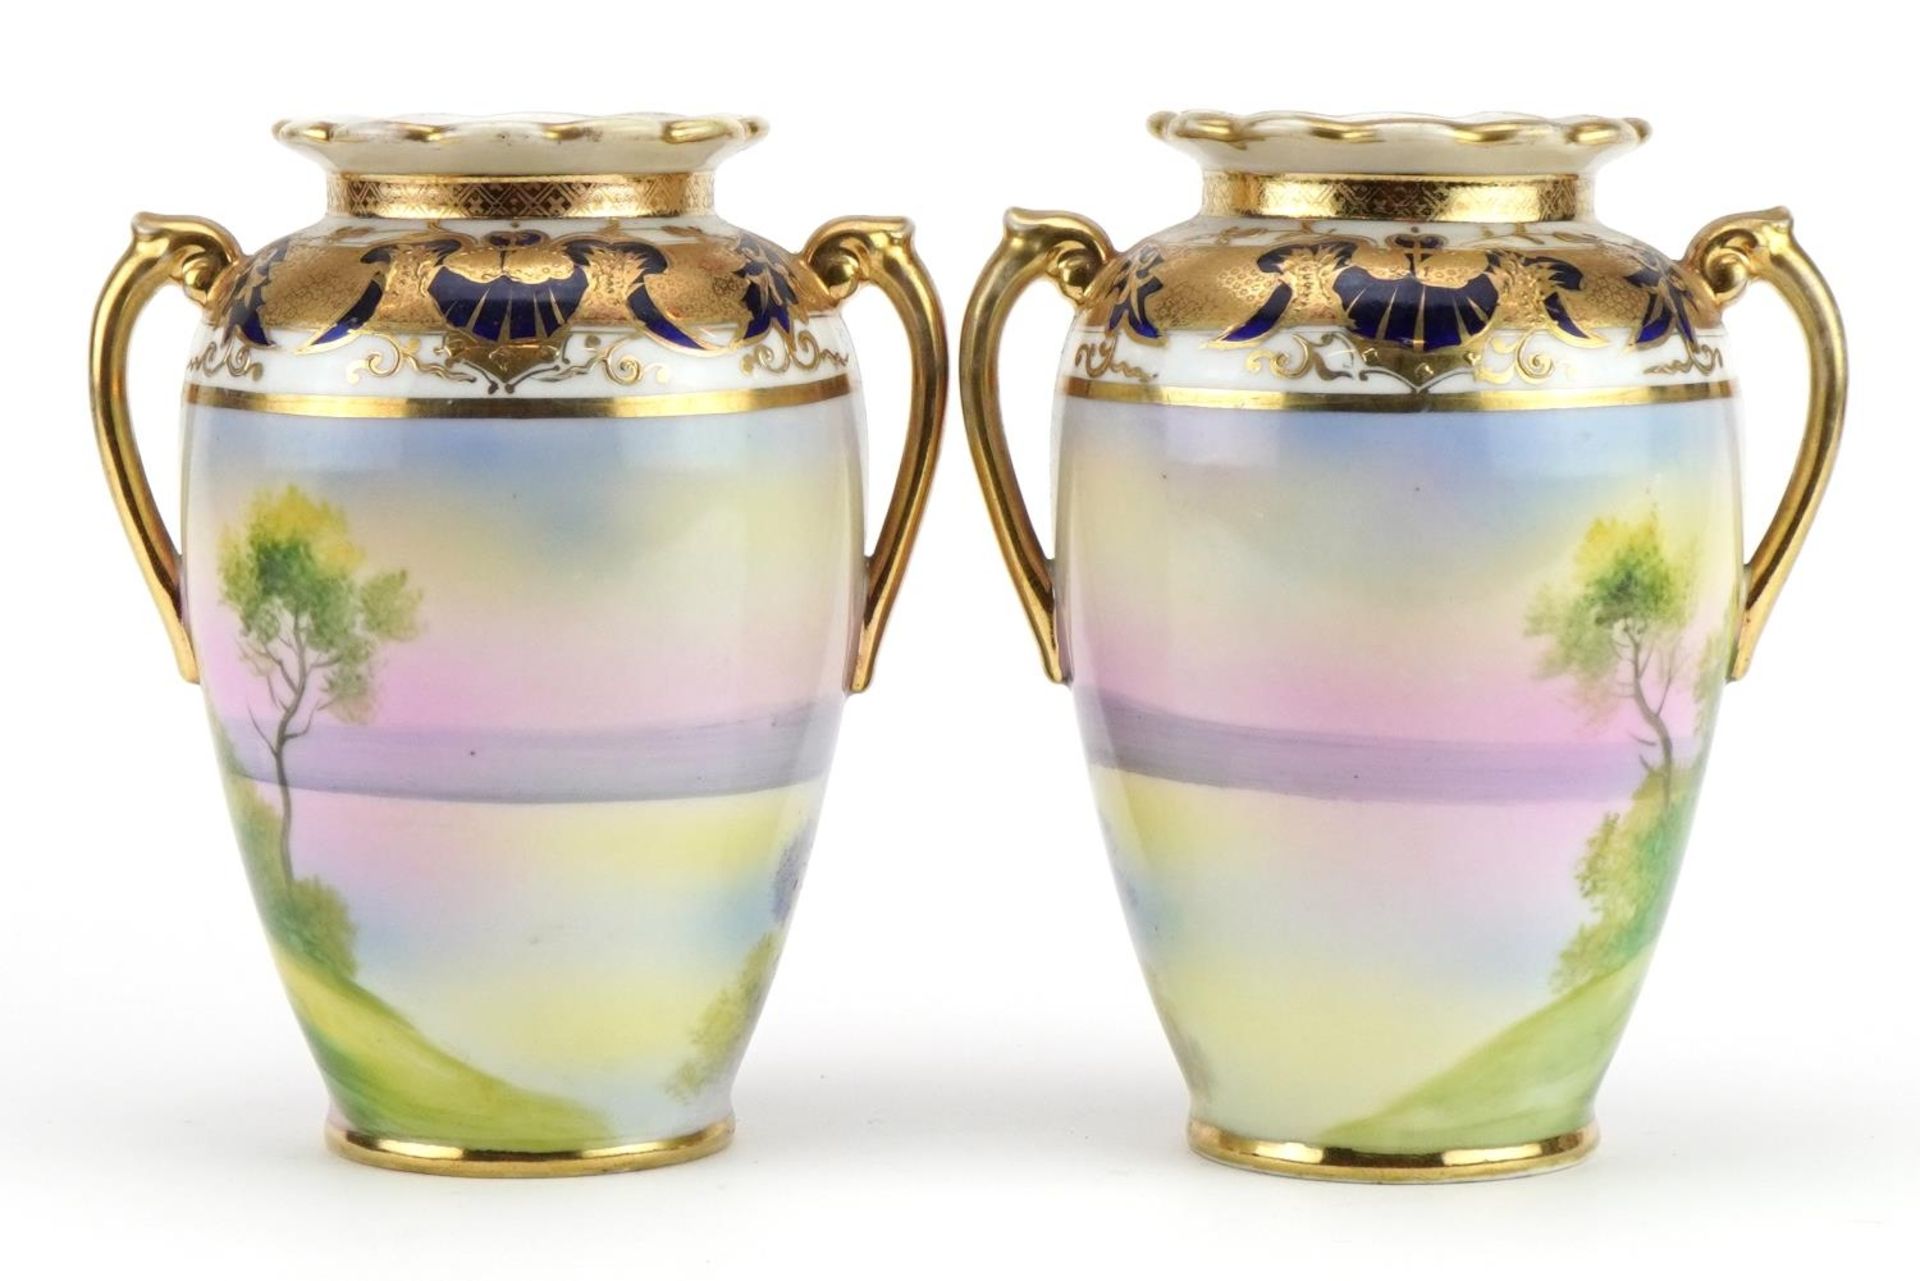 Pair of Noritake Japanese porcelain vases with twin handles, each hand painted with cottages - Image 2 of 4